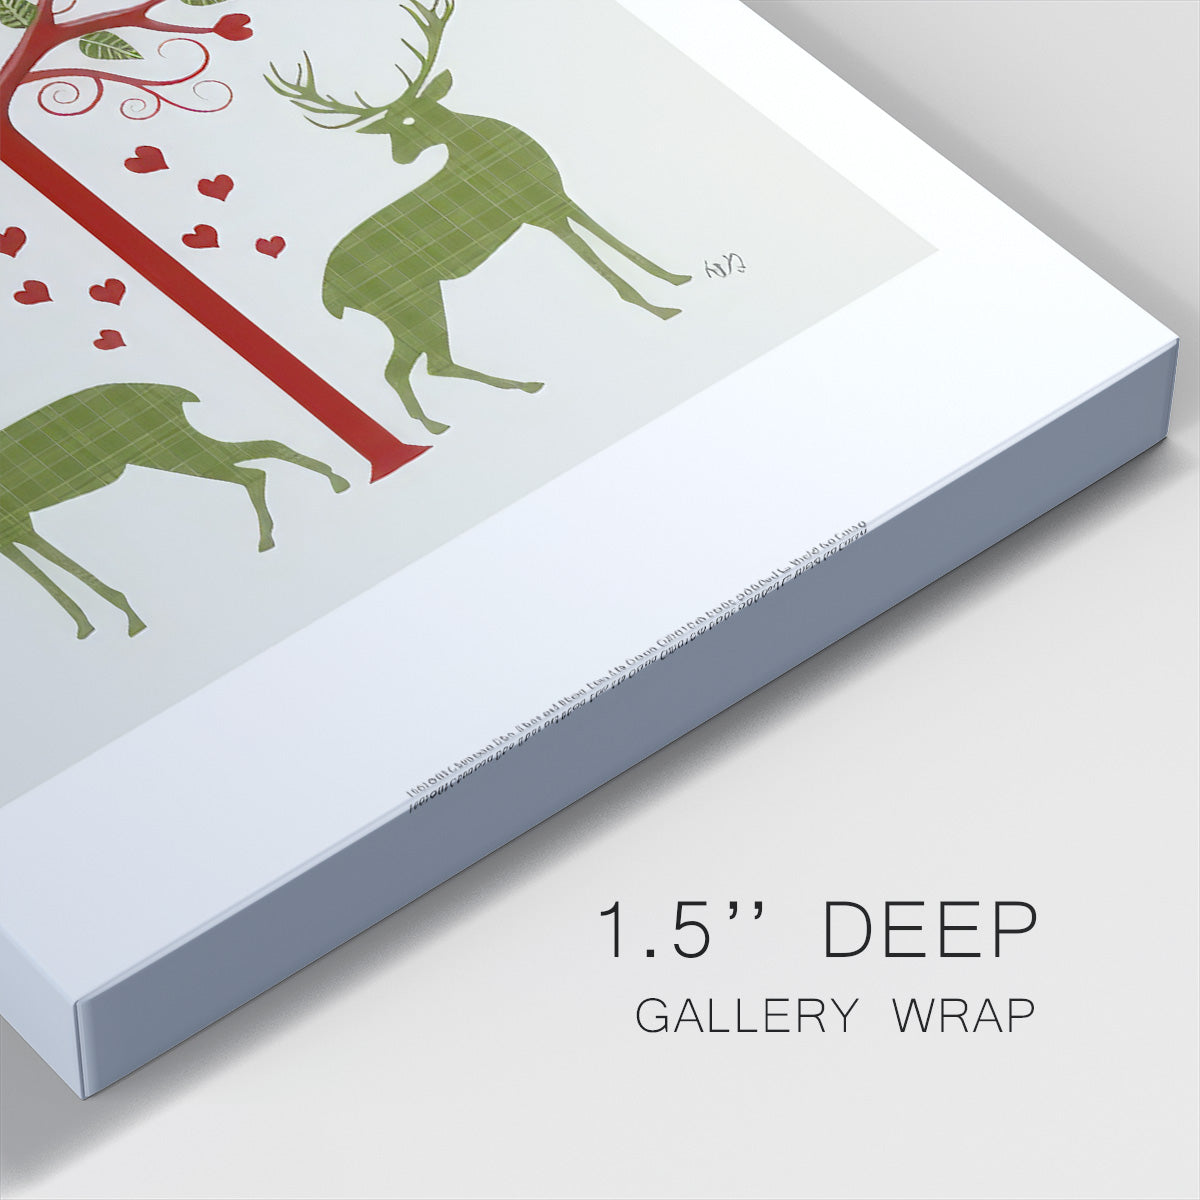 Christmas Des  - Deer and Heart Tree, On Cream - Gallery Wrapped Canvas